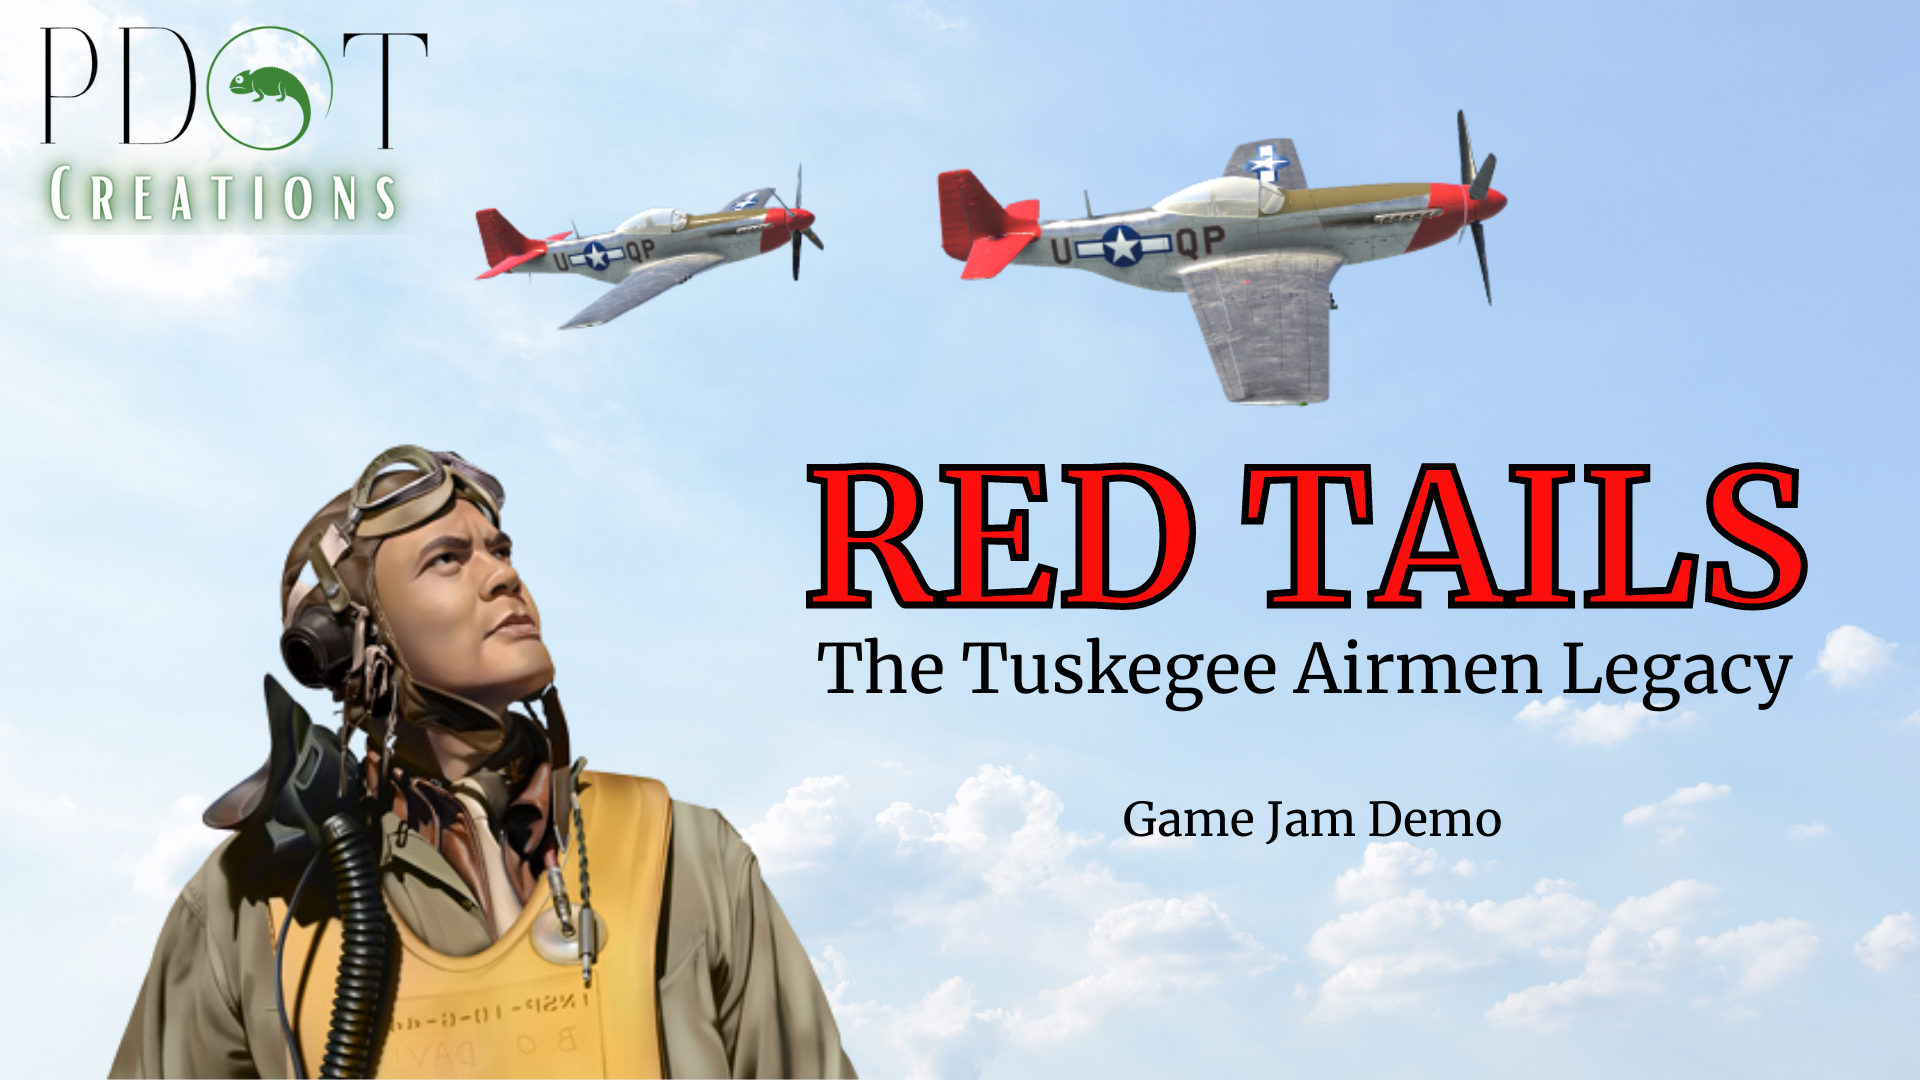 RED TAILS: The Tuskegee Airmen Legacy